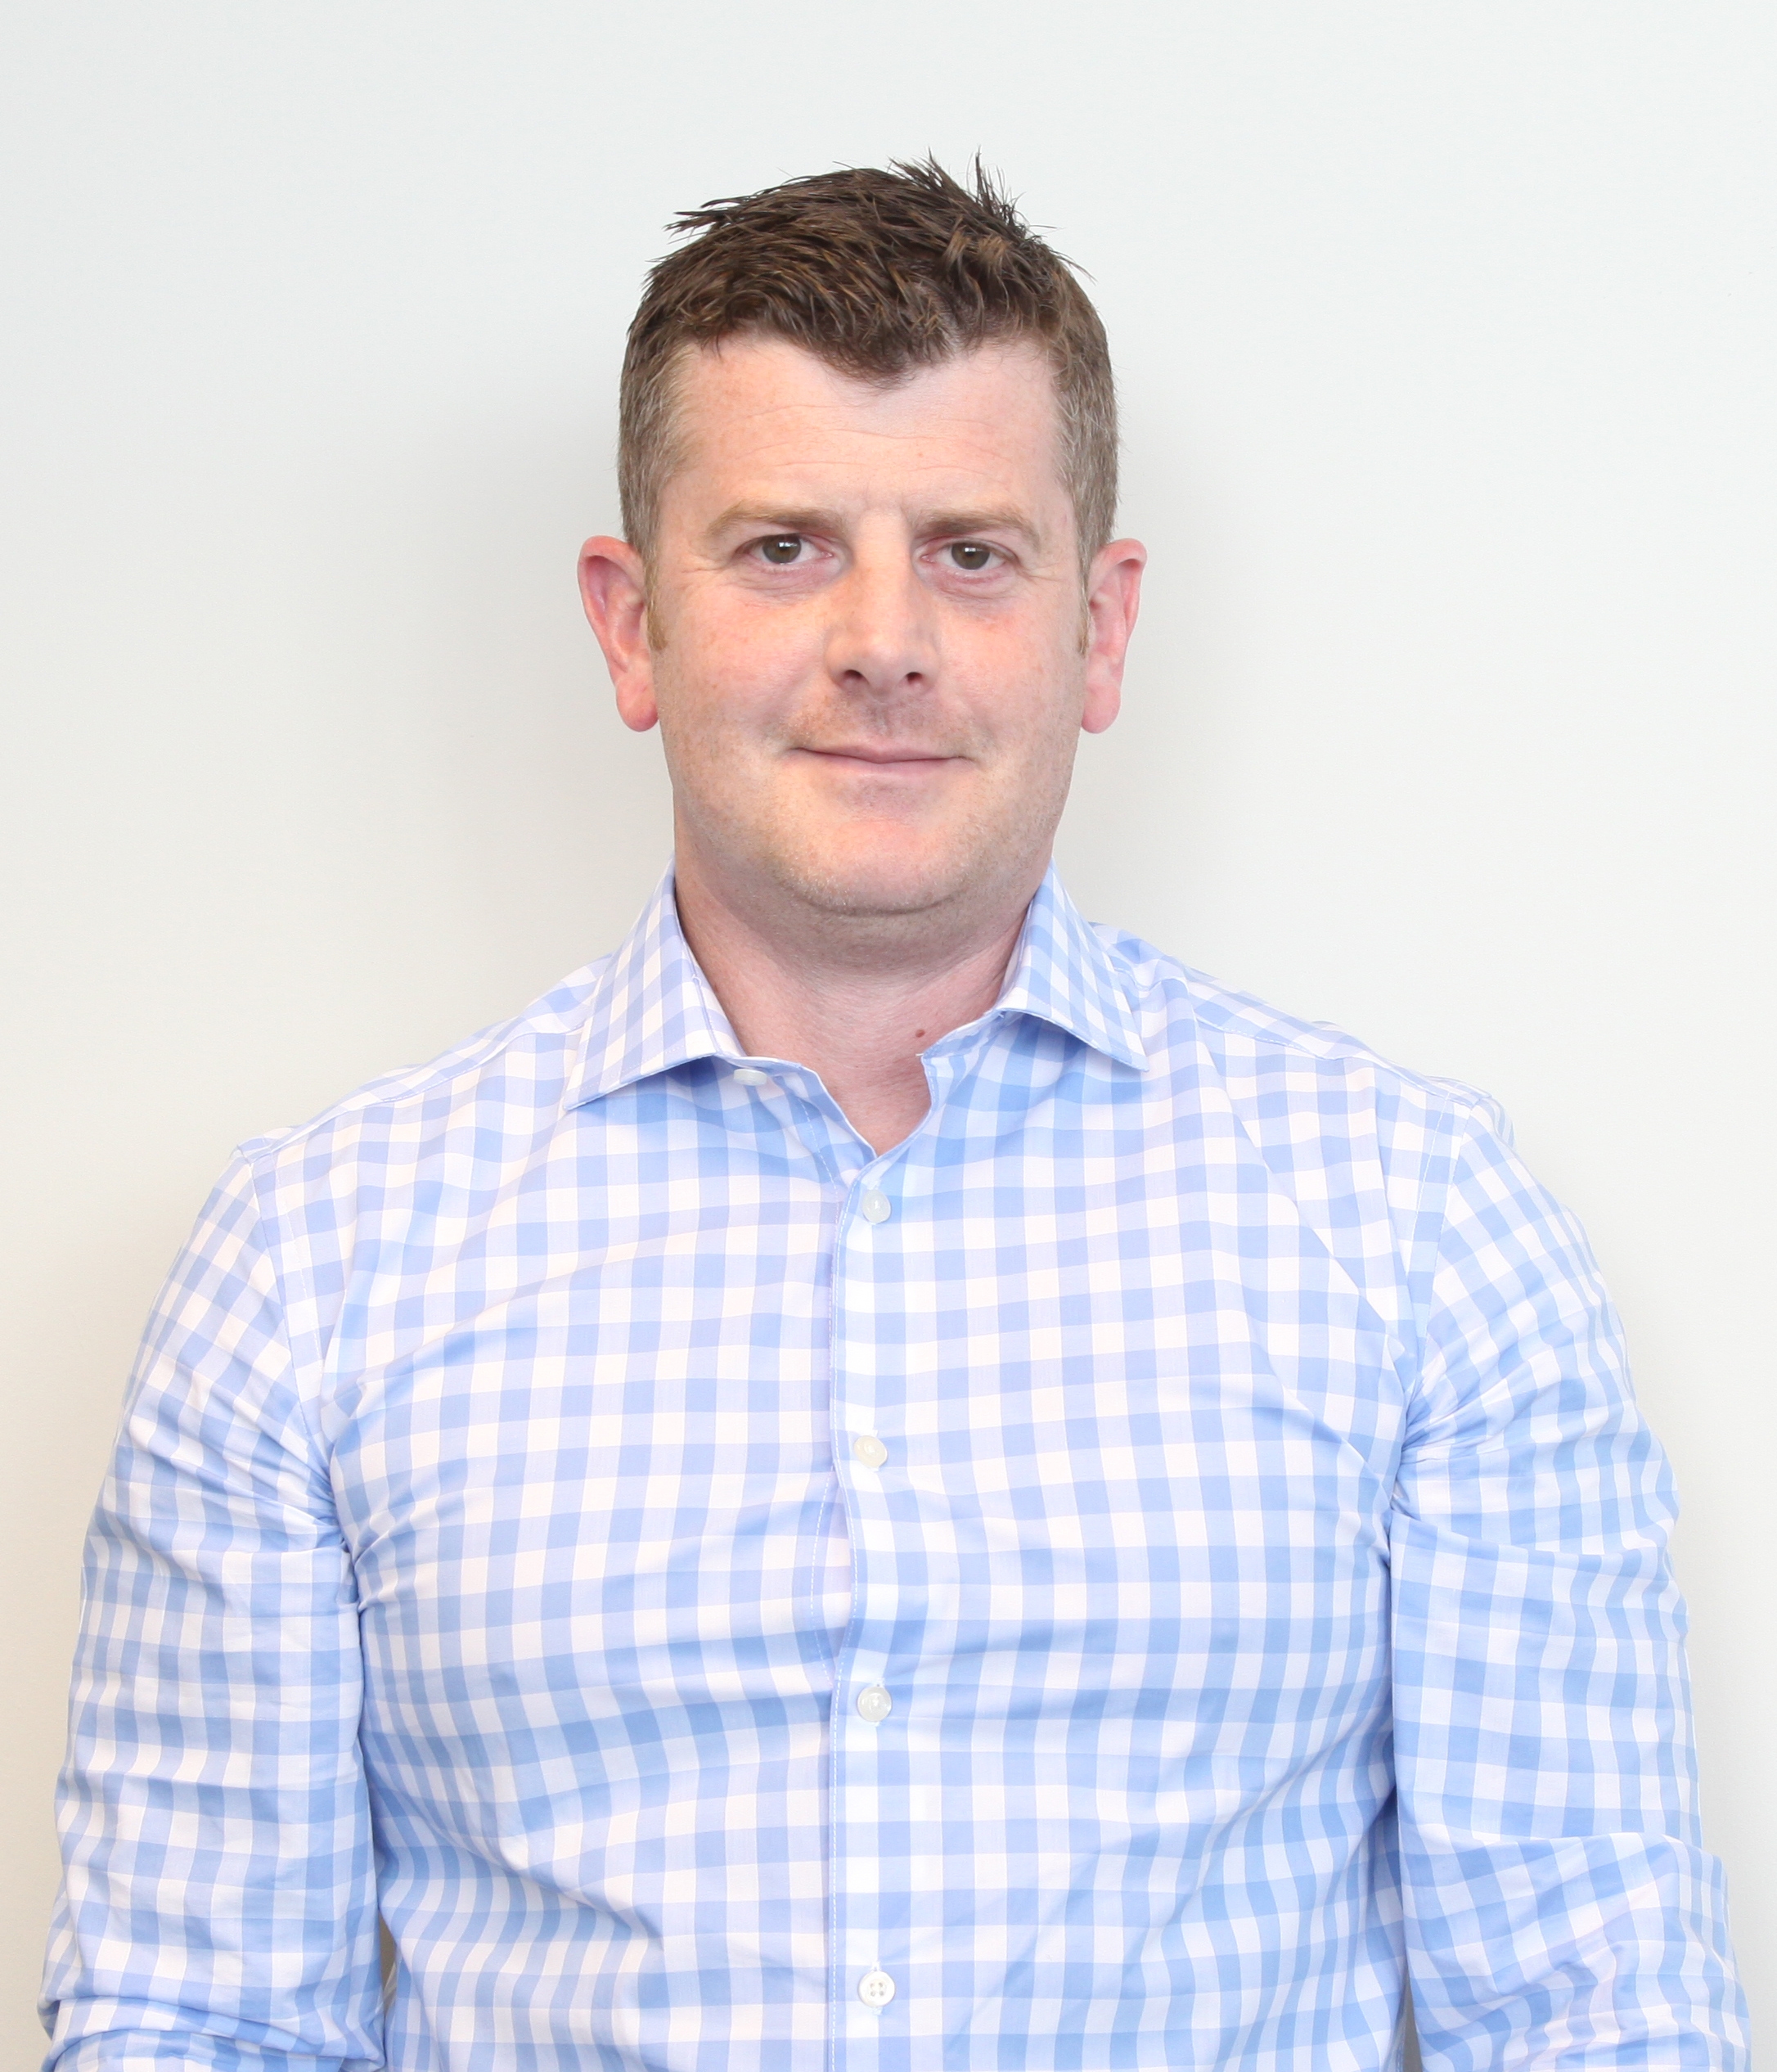 P C Henderson Welcomes Ian Sproat to the Research and Development Team